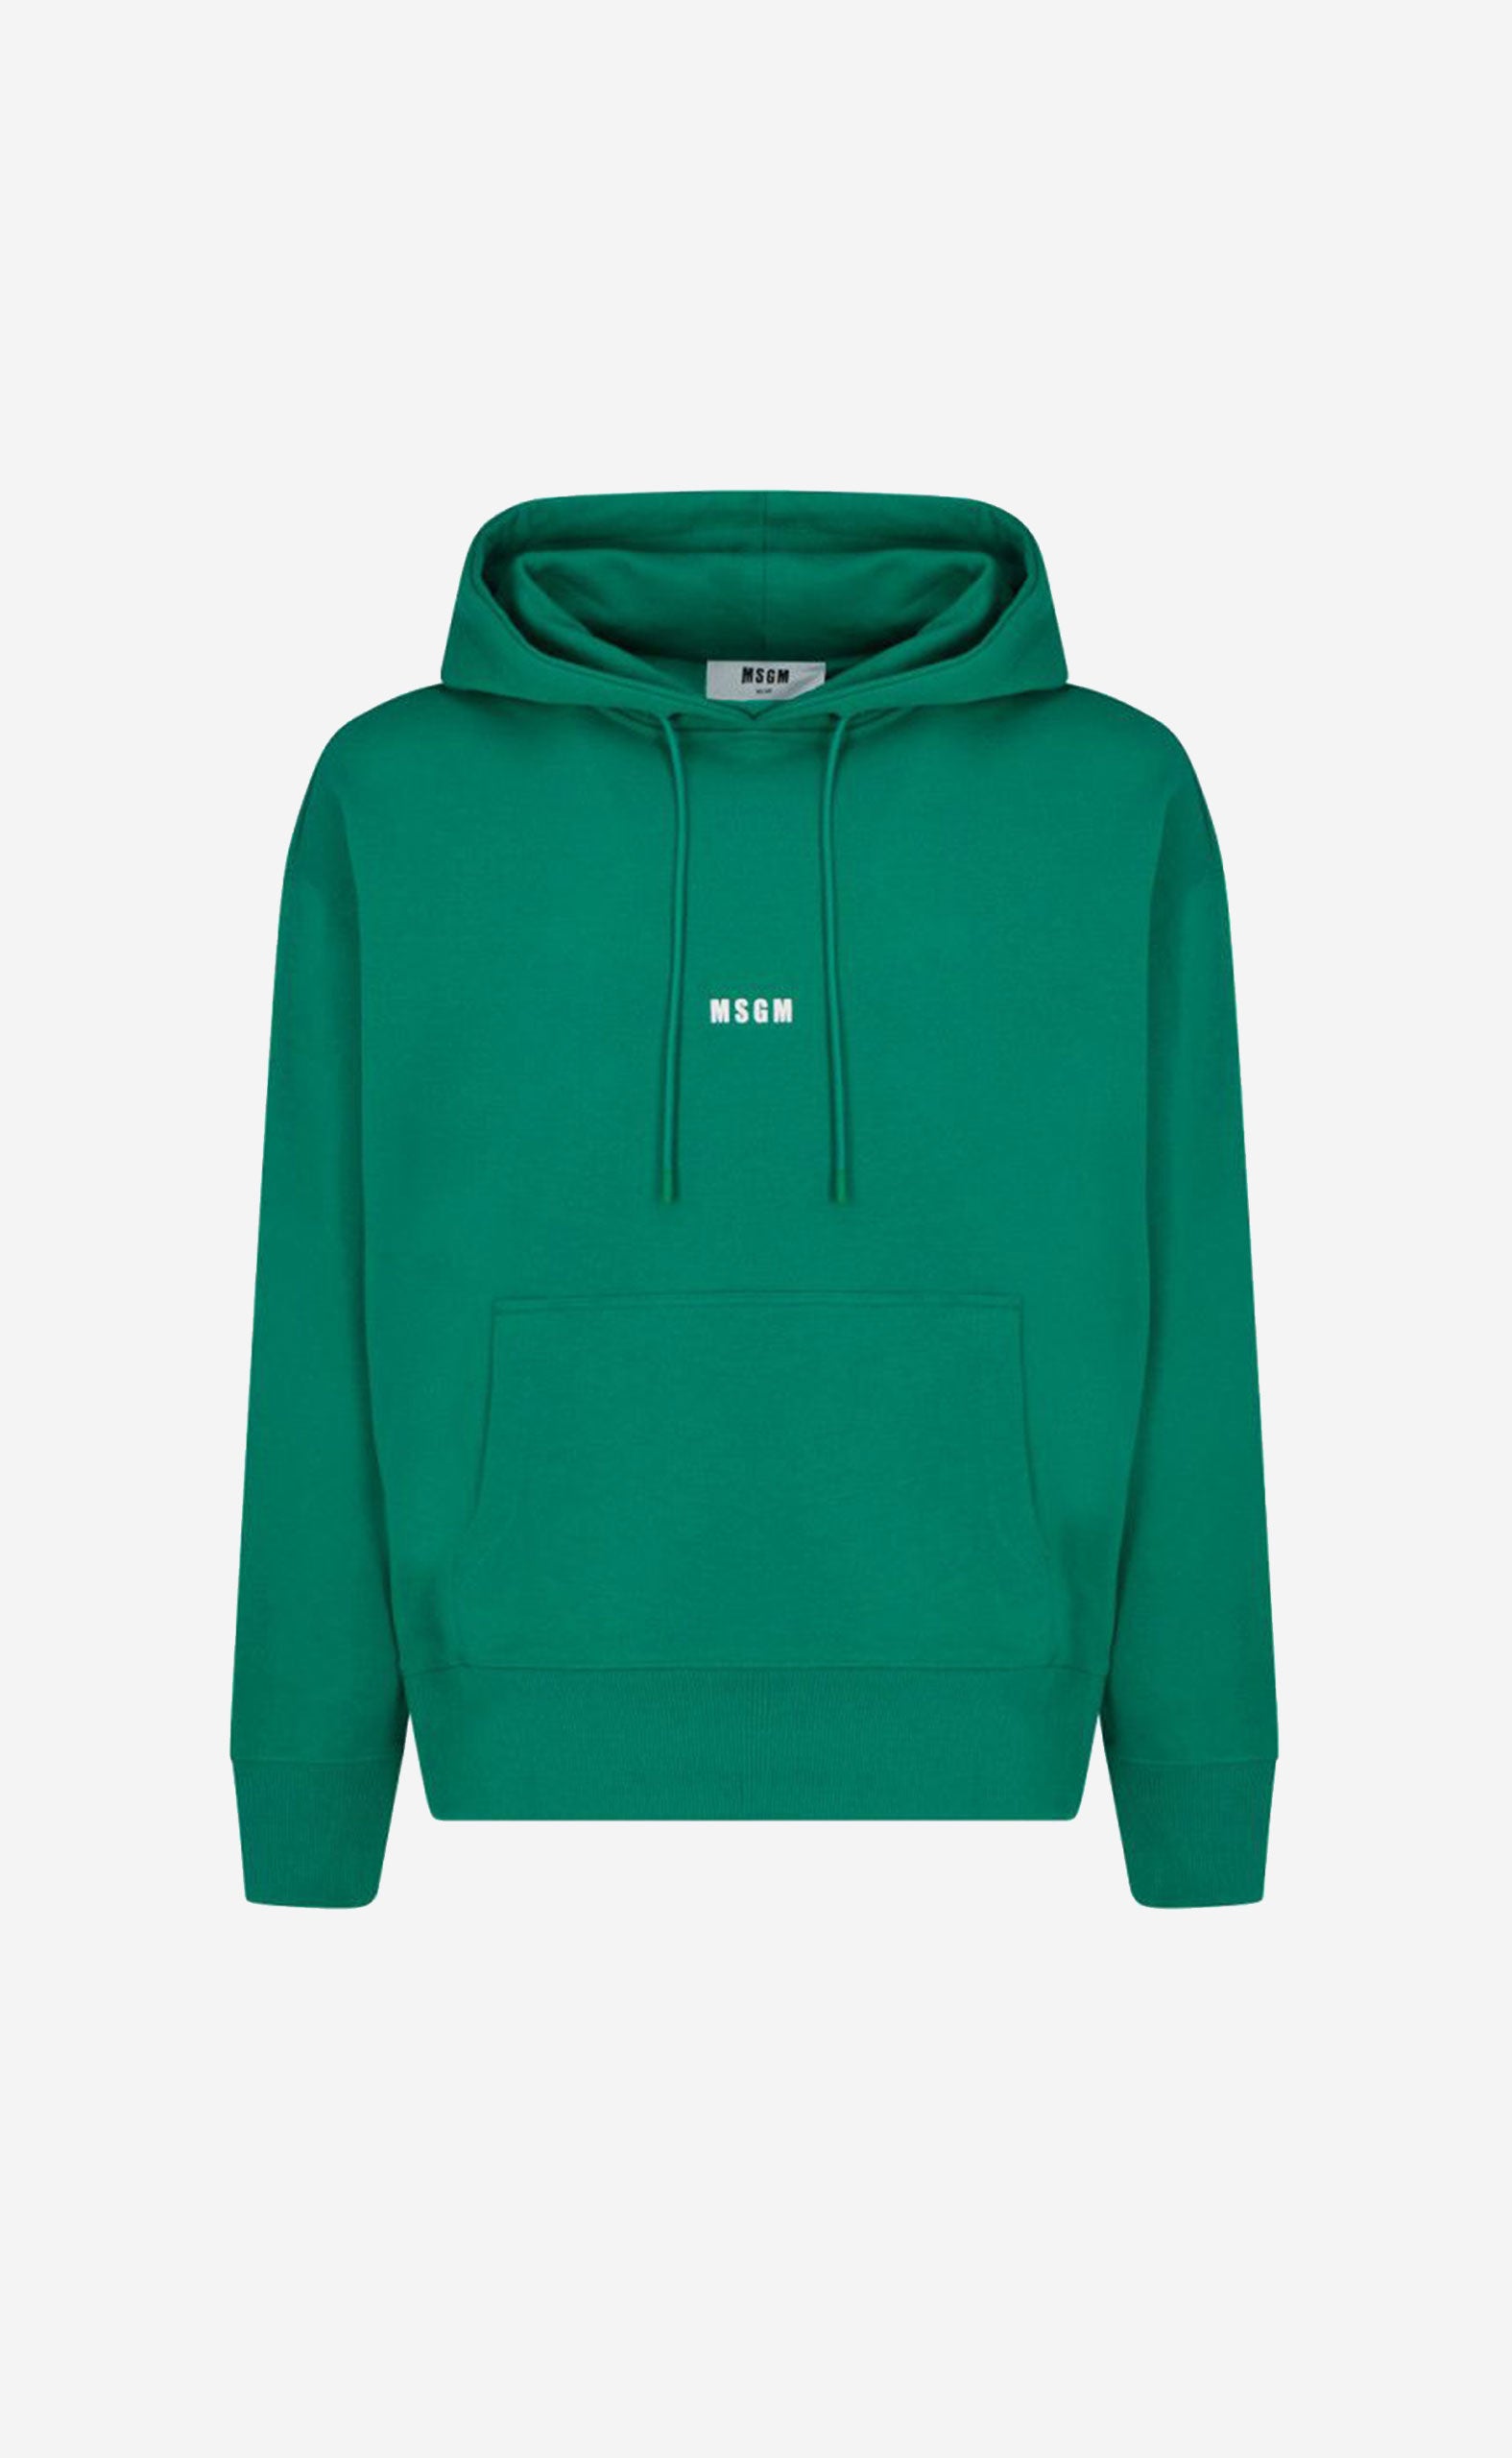 PEPPER GREEN SOLID COLOR COTTON HOODED SWEATSHIRT WITH SMALL MSGM LOGO